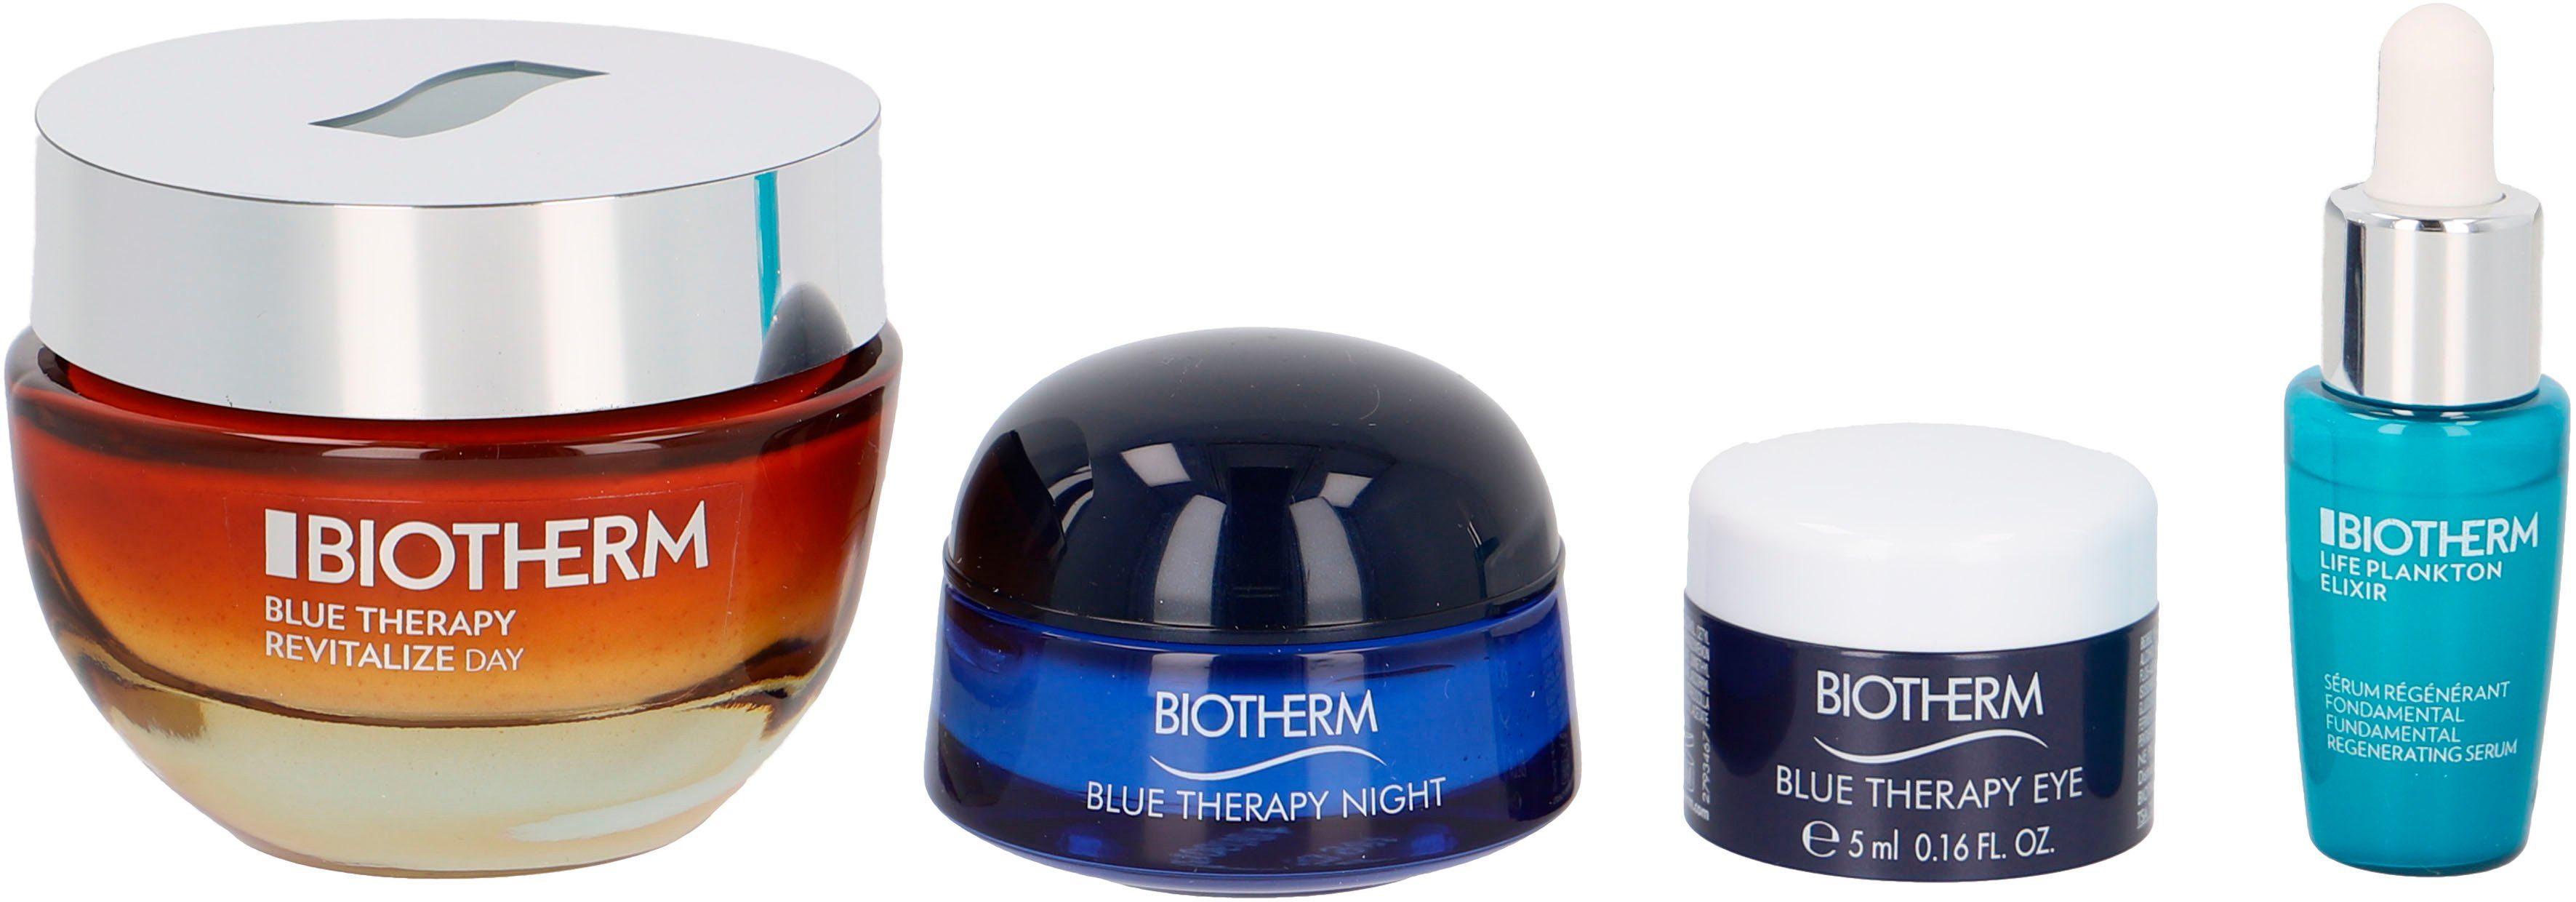 4 Value Cream Therapy Day BIOTHERM Blue Gesichtspflege-Set Set, Revitalize